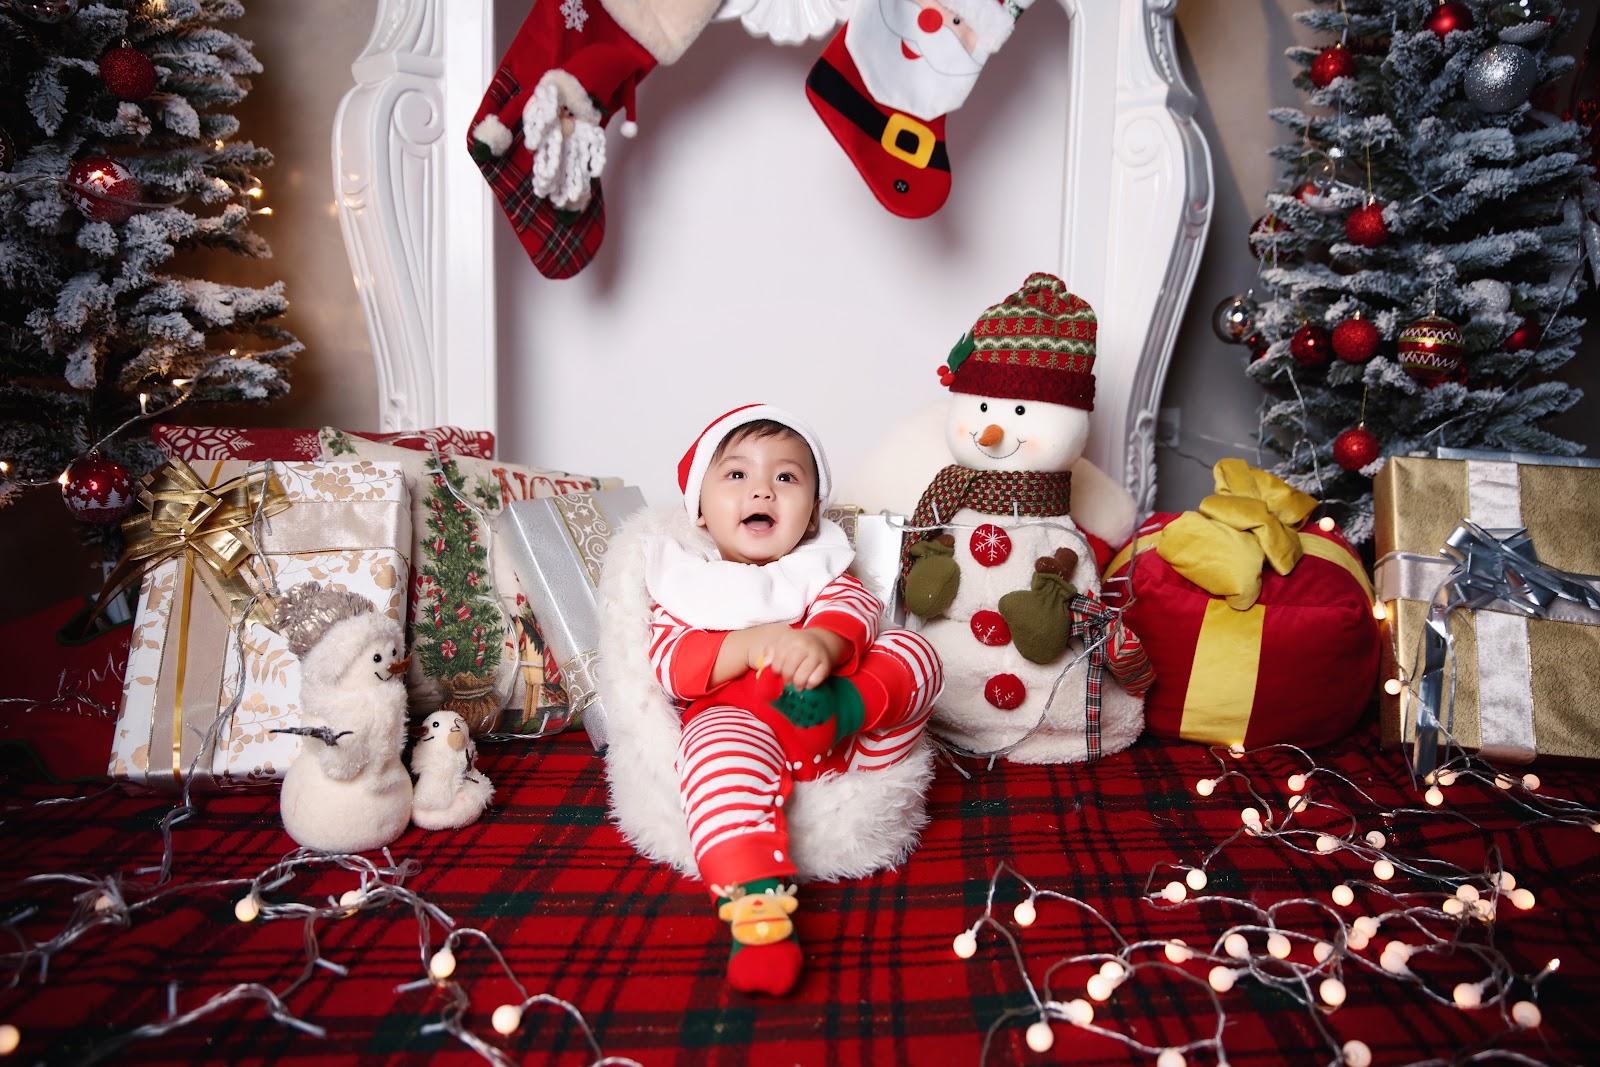 newborn christmas photo idea: newborn dressed up as a Christmas elf, lying on a bed or seating on a sofa bed